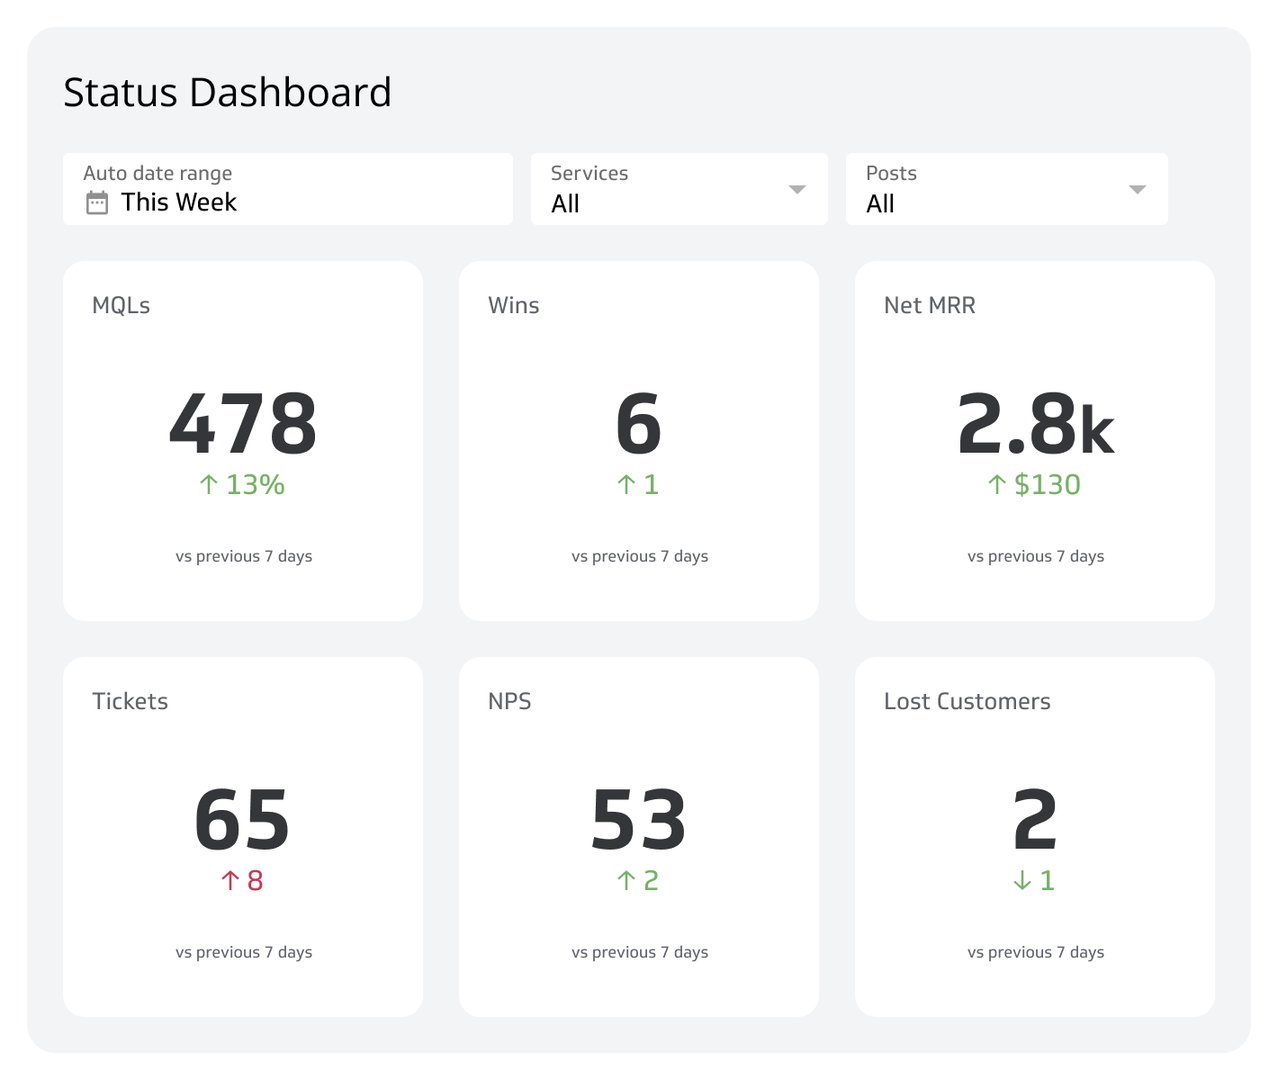 Business Dashboard Examples - Status Dashboard